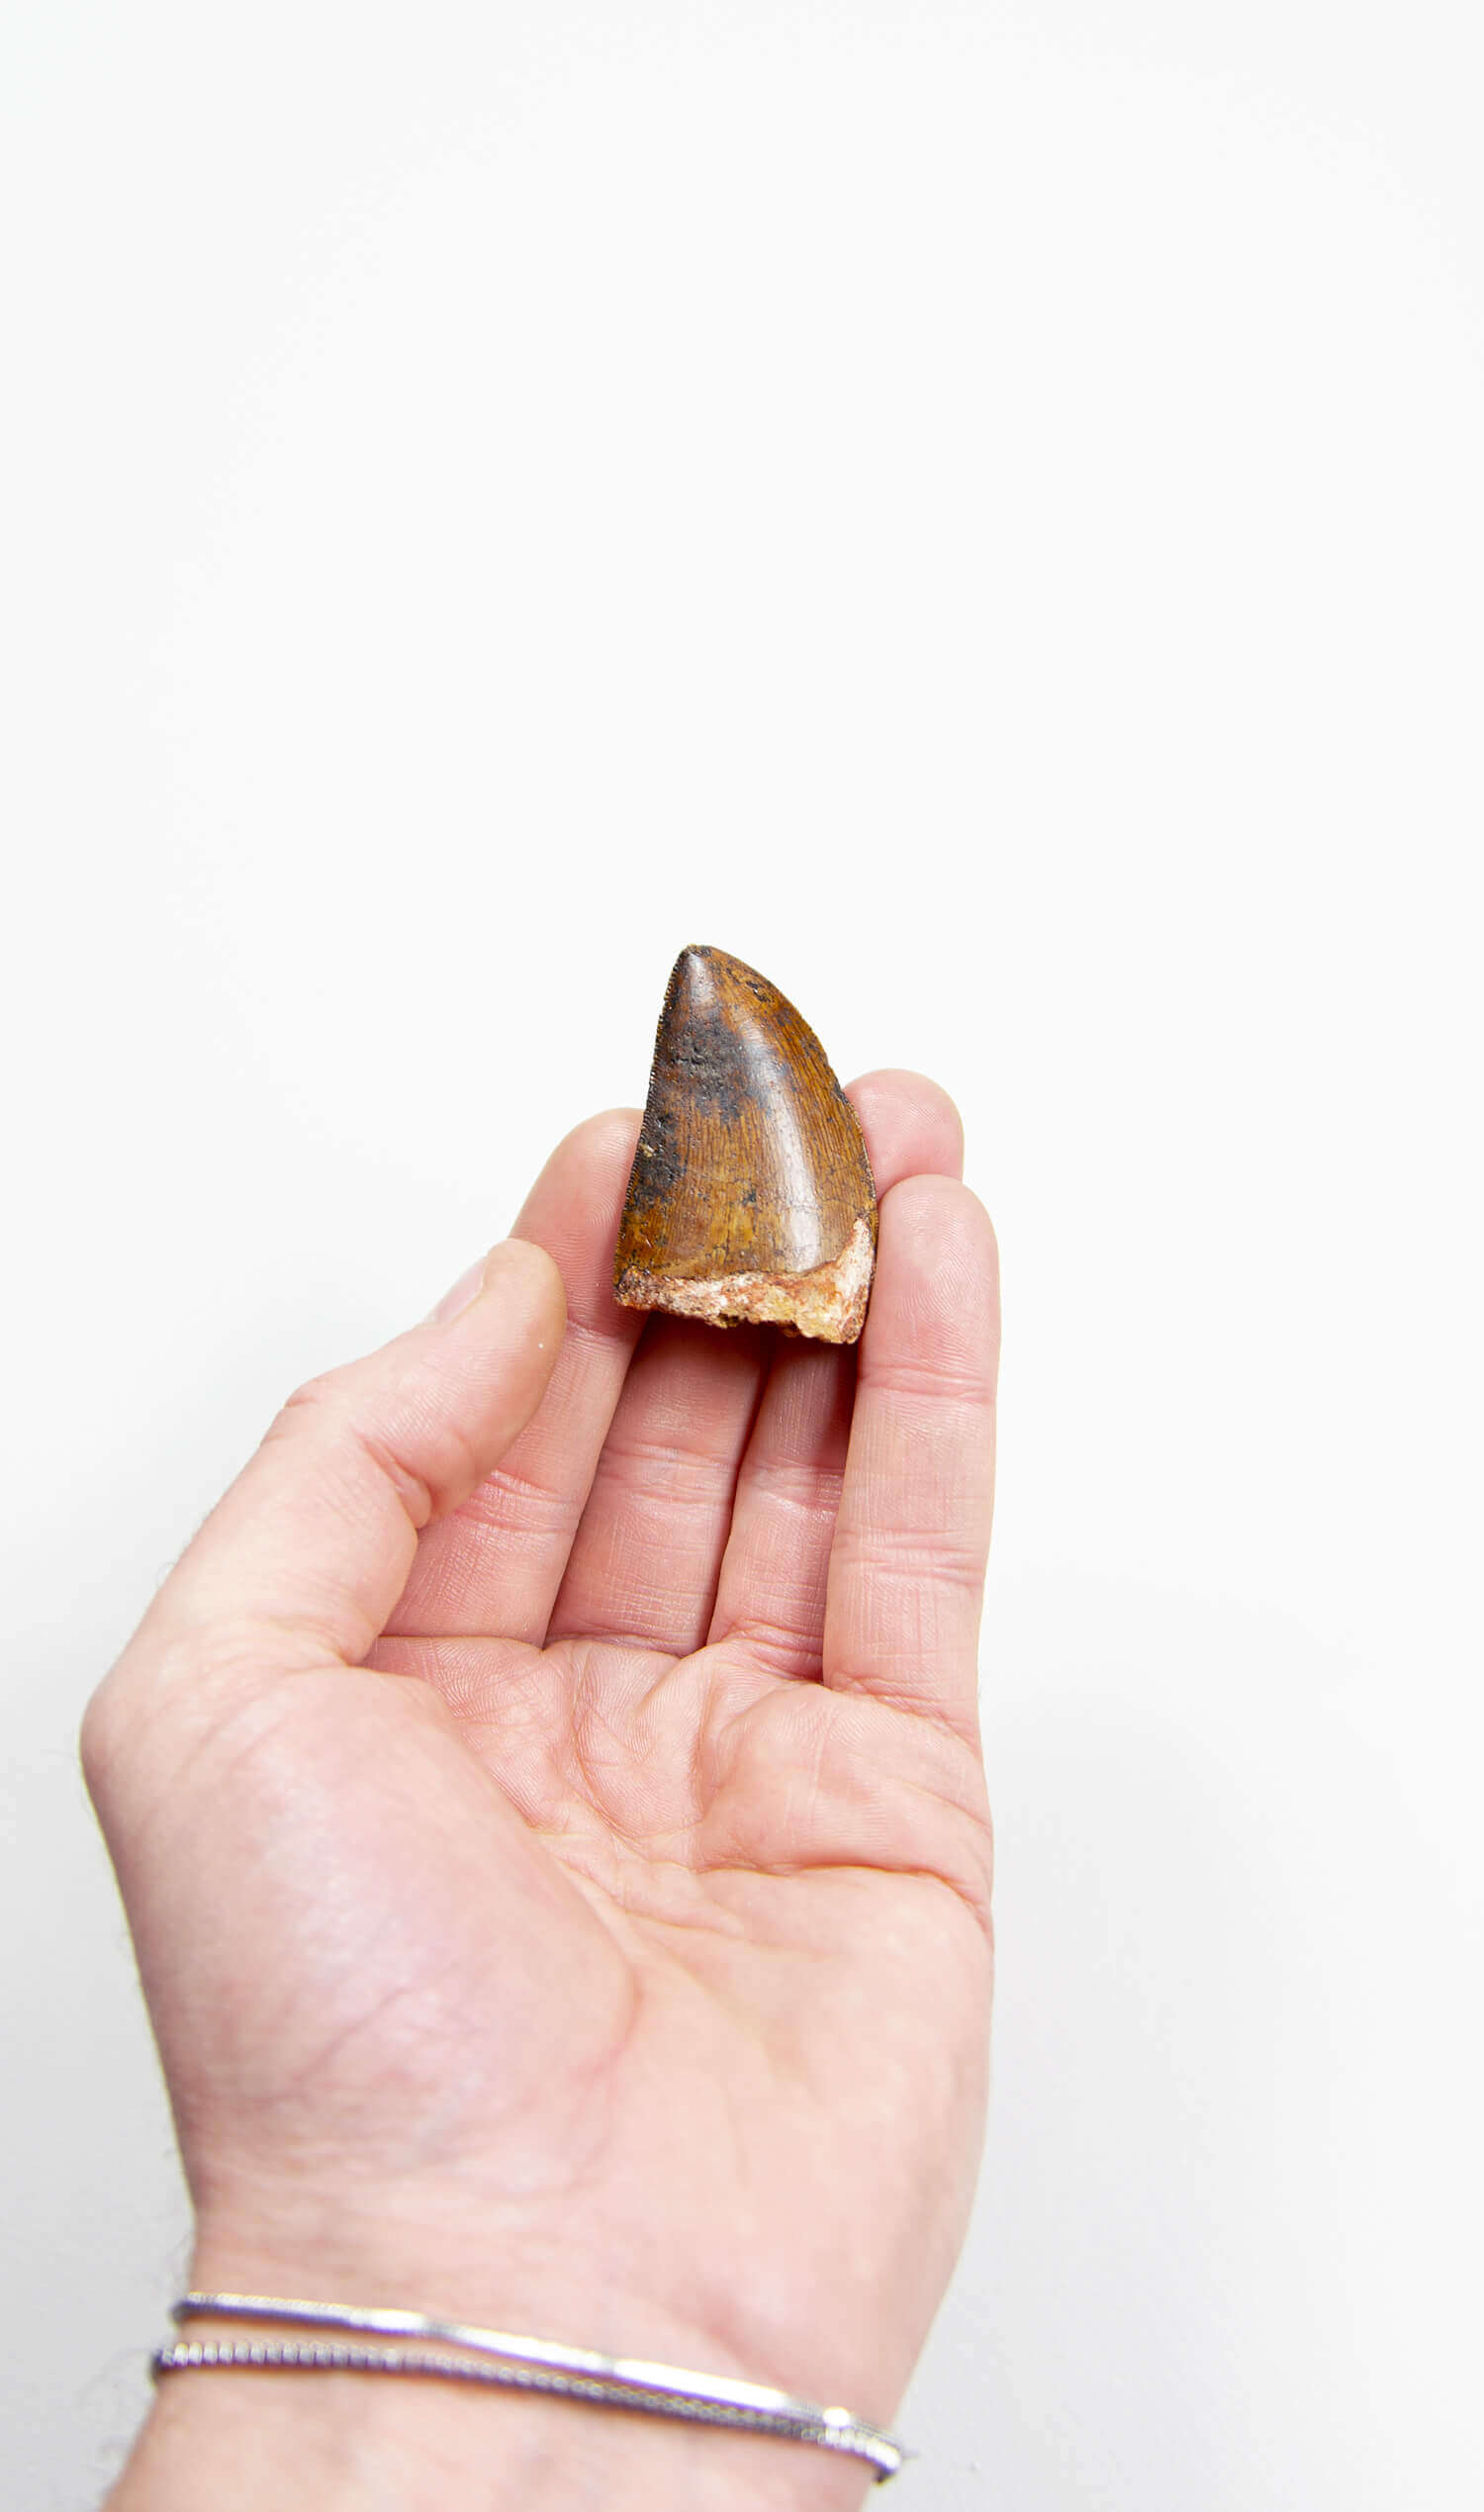 real fossil dinosaur carcharodontosaurus tooth for sale at the uk fossil store 33